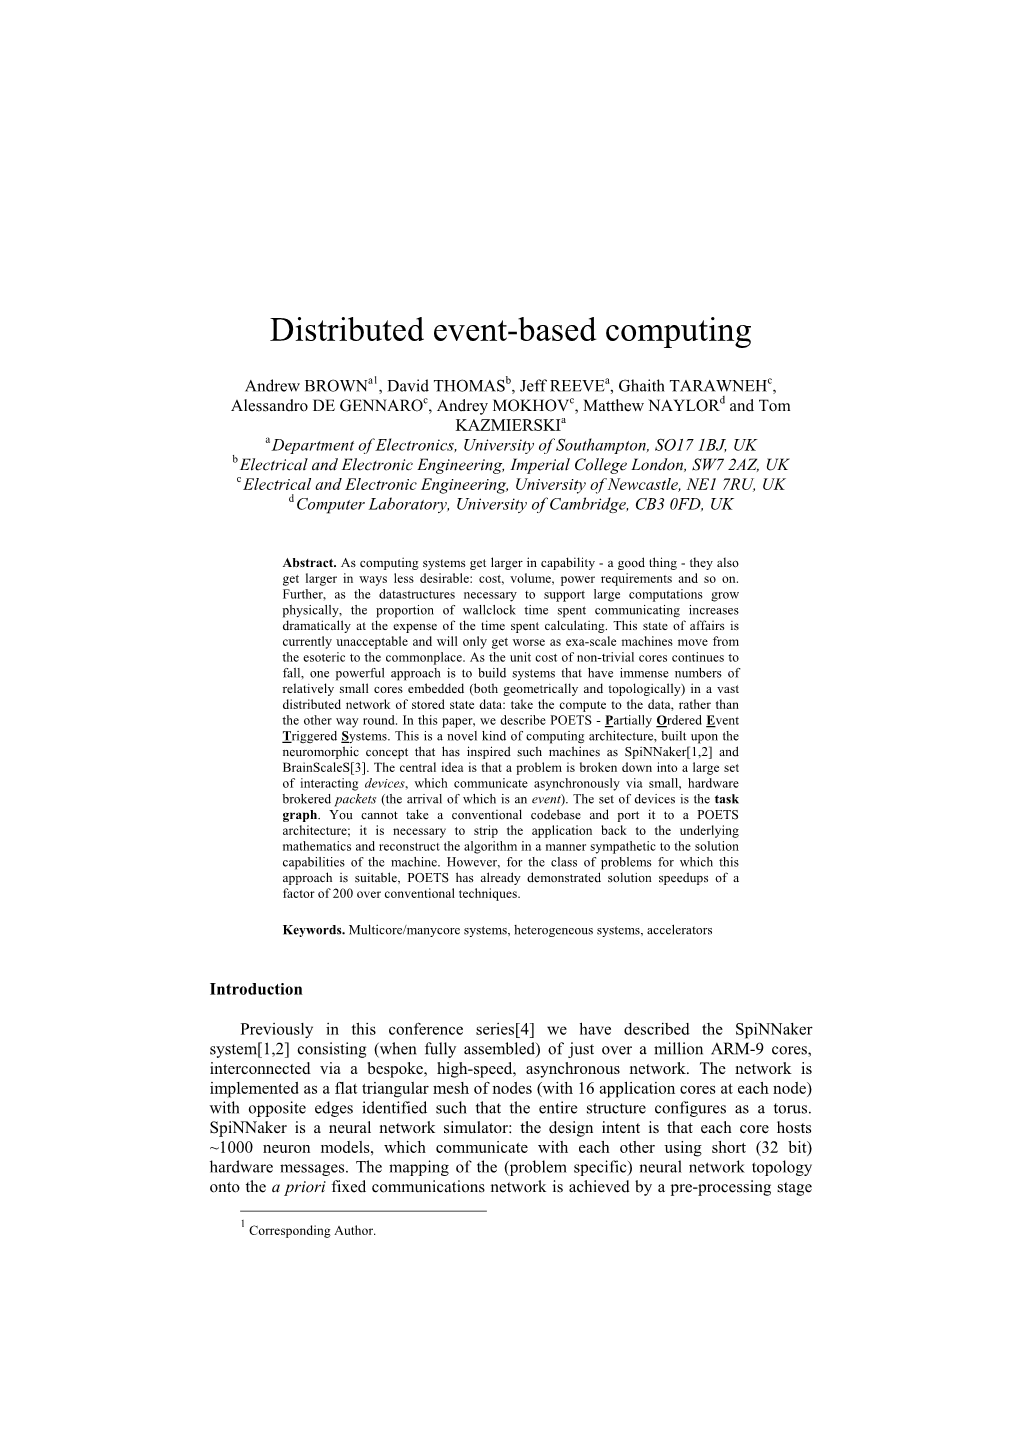 Distributed Event-Based Computing